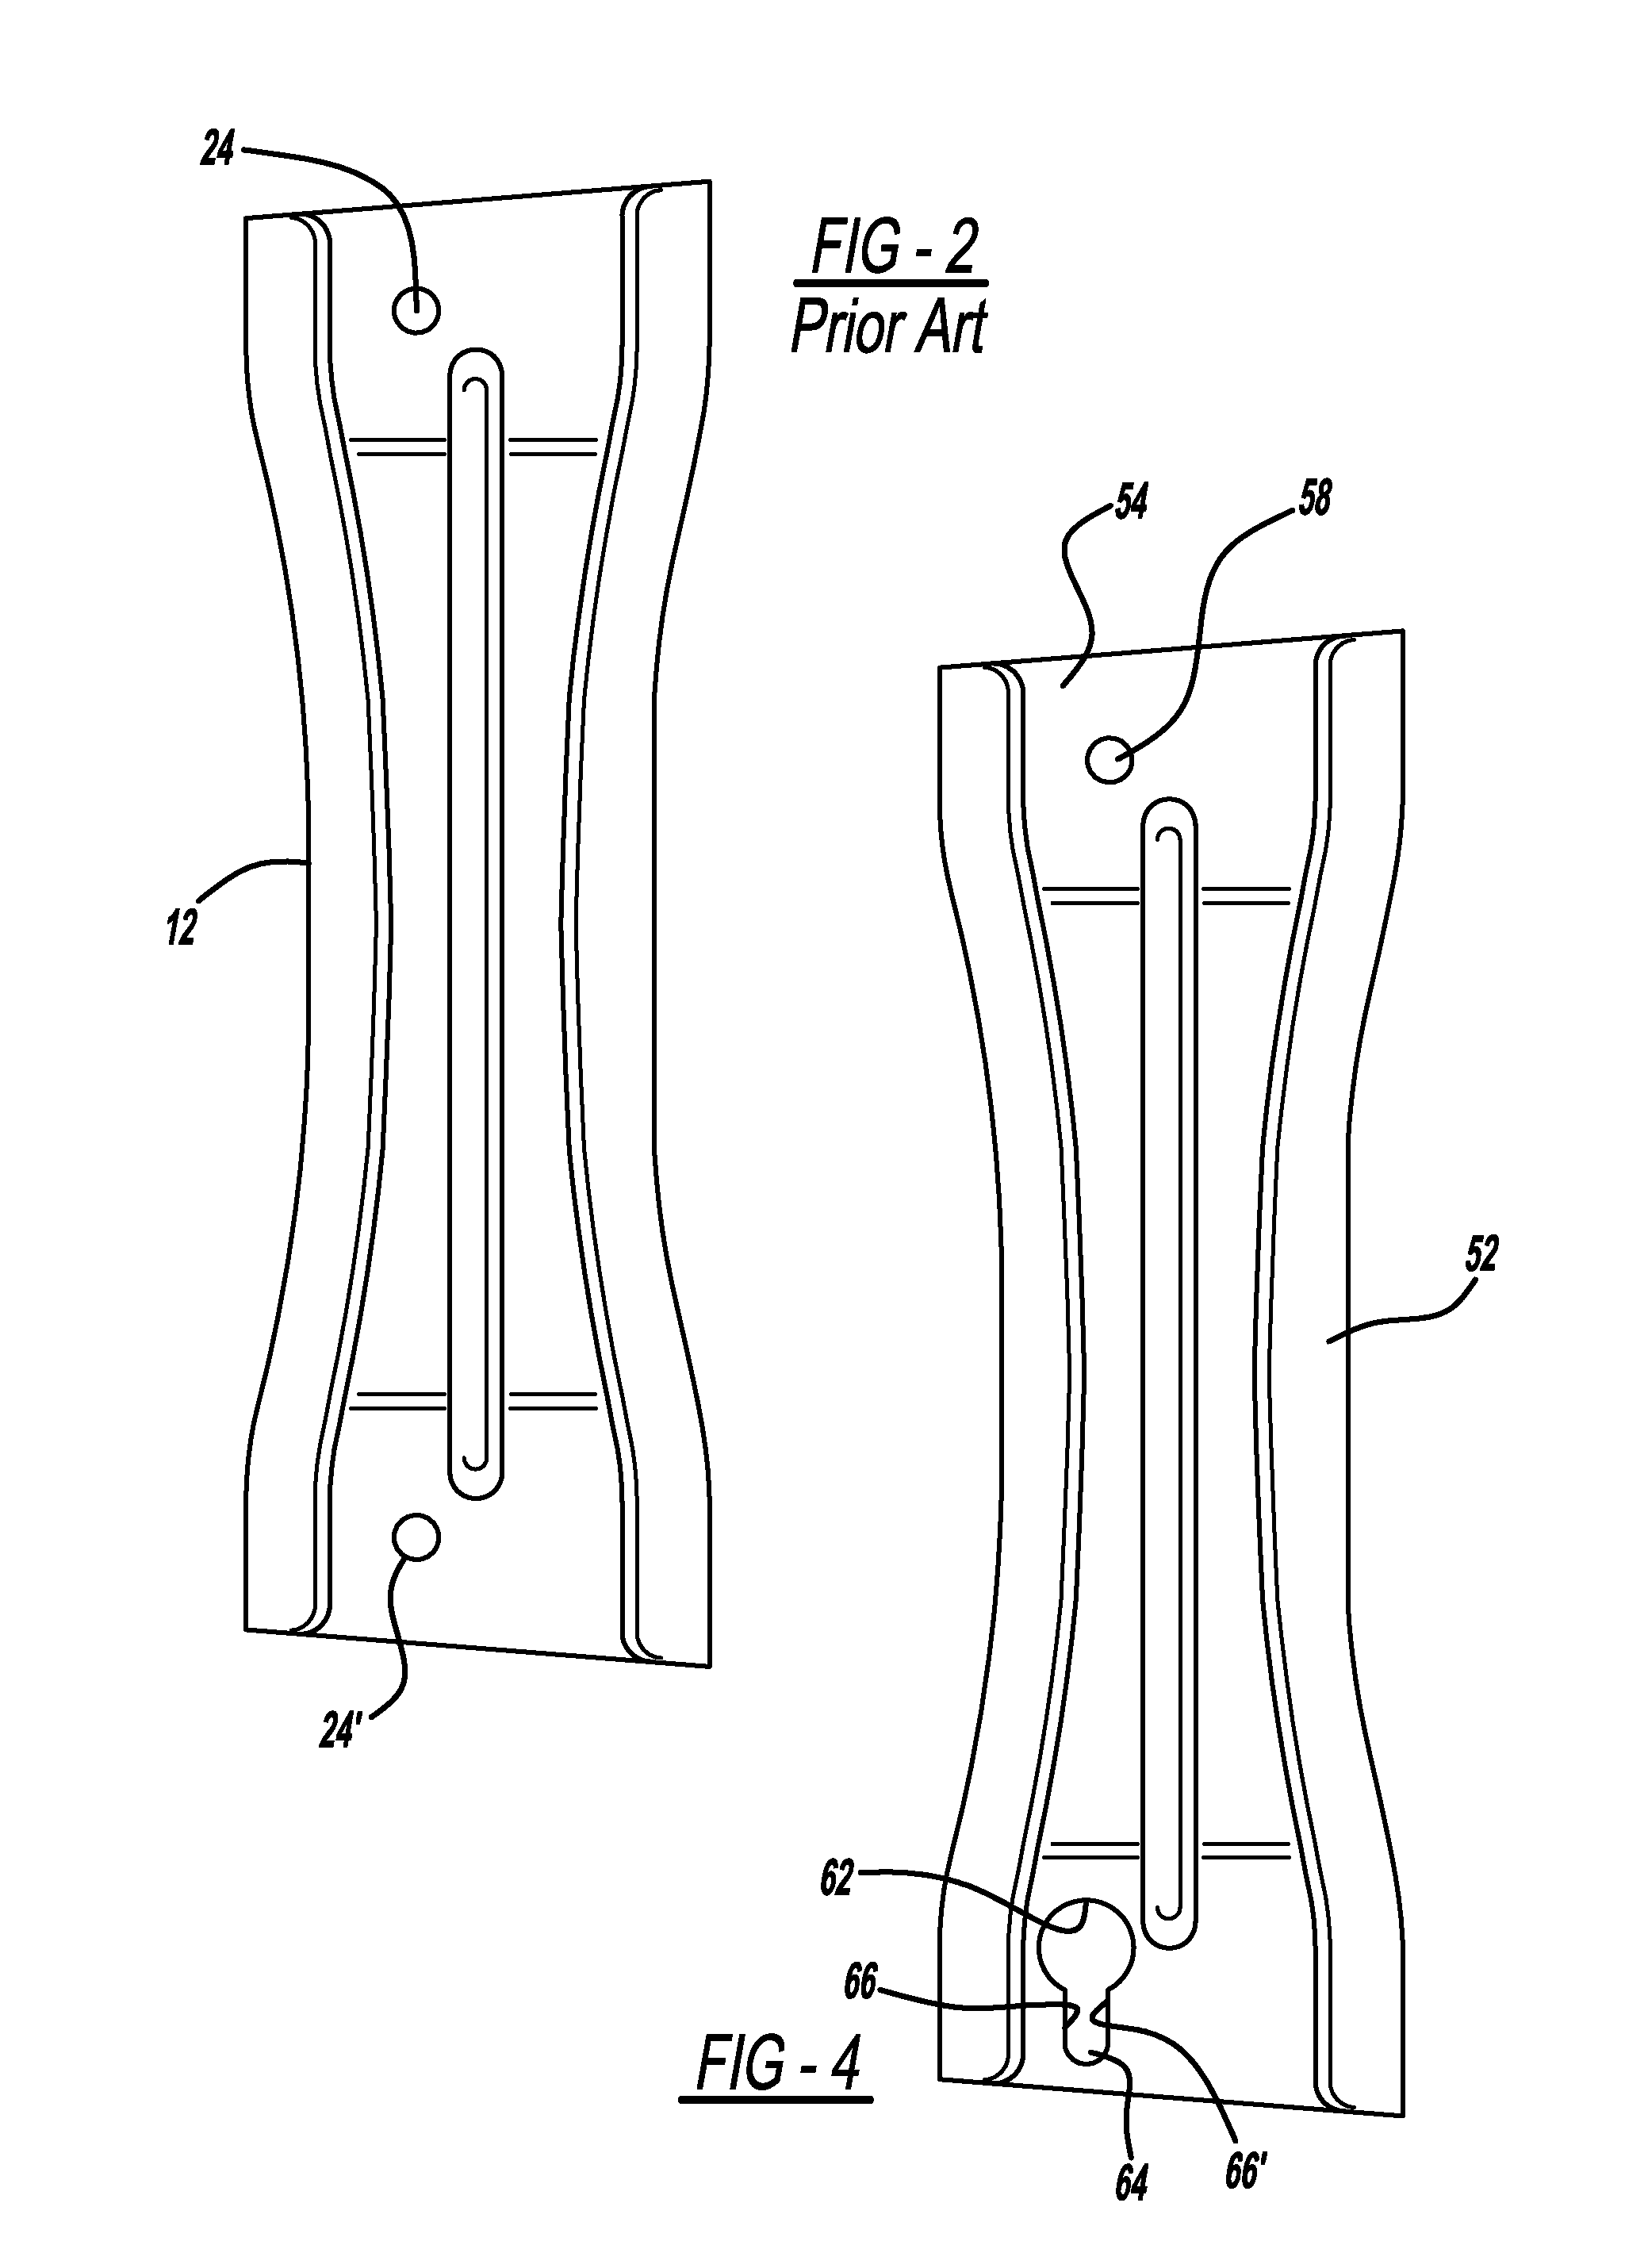 Releasable tunnel brace for a vehicle